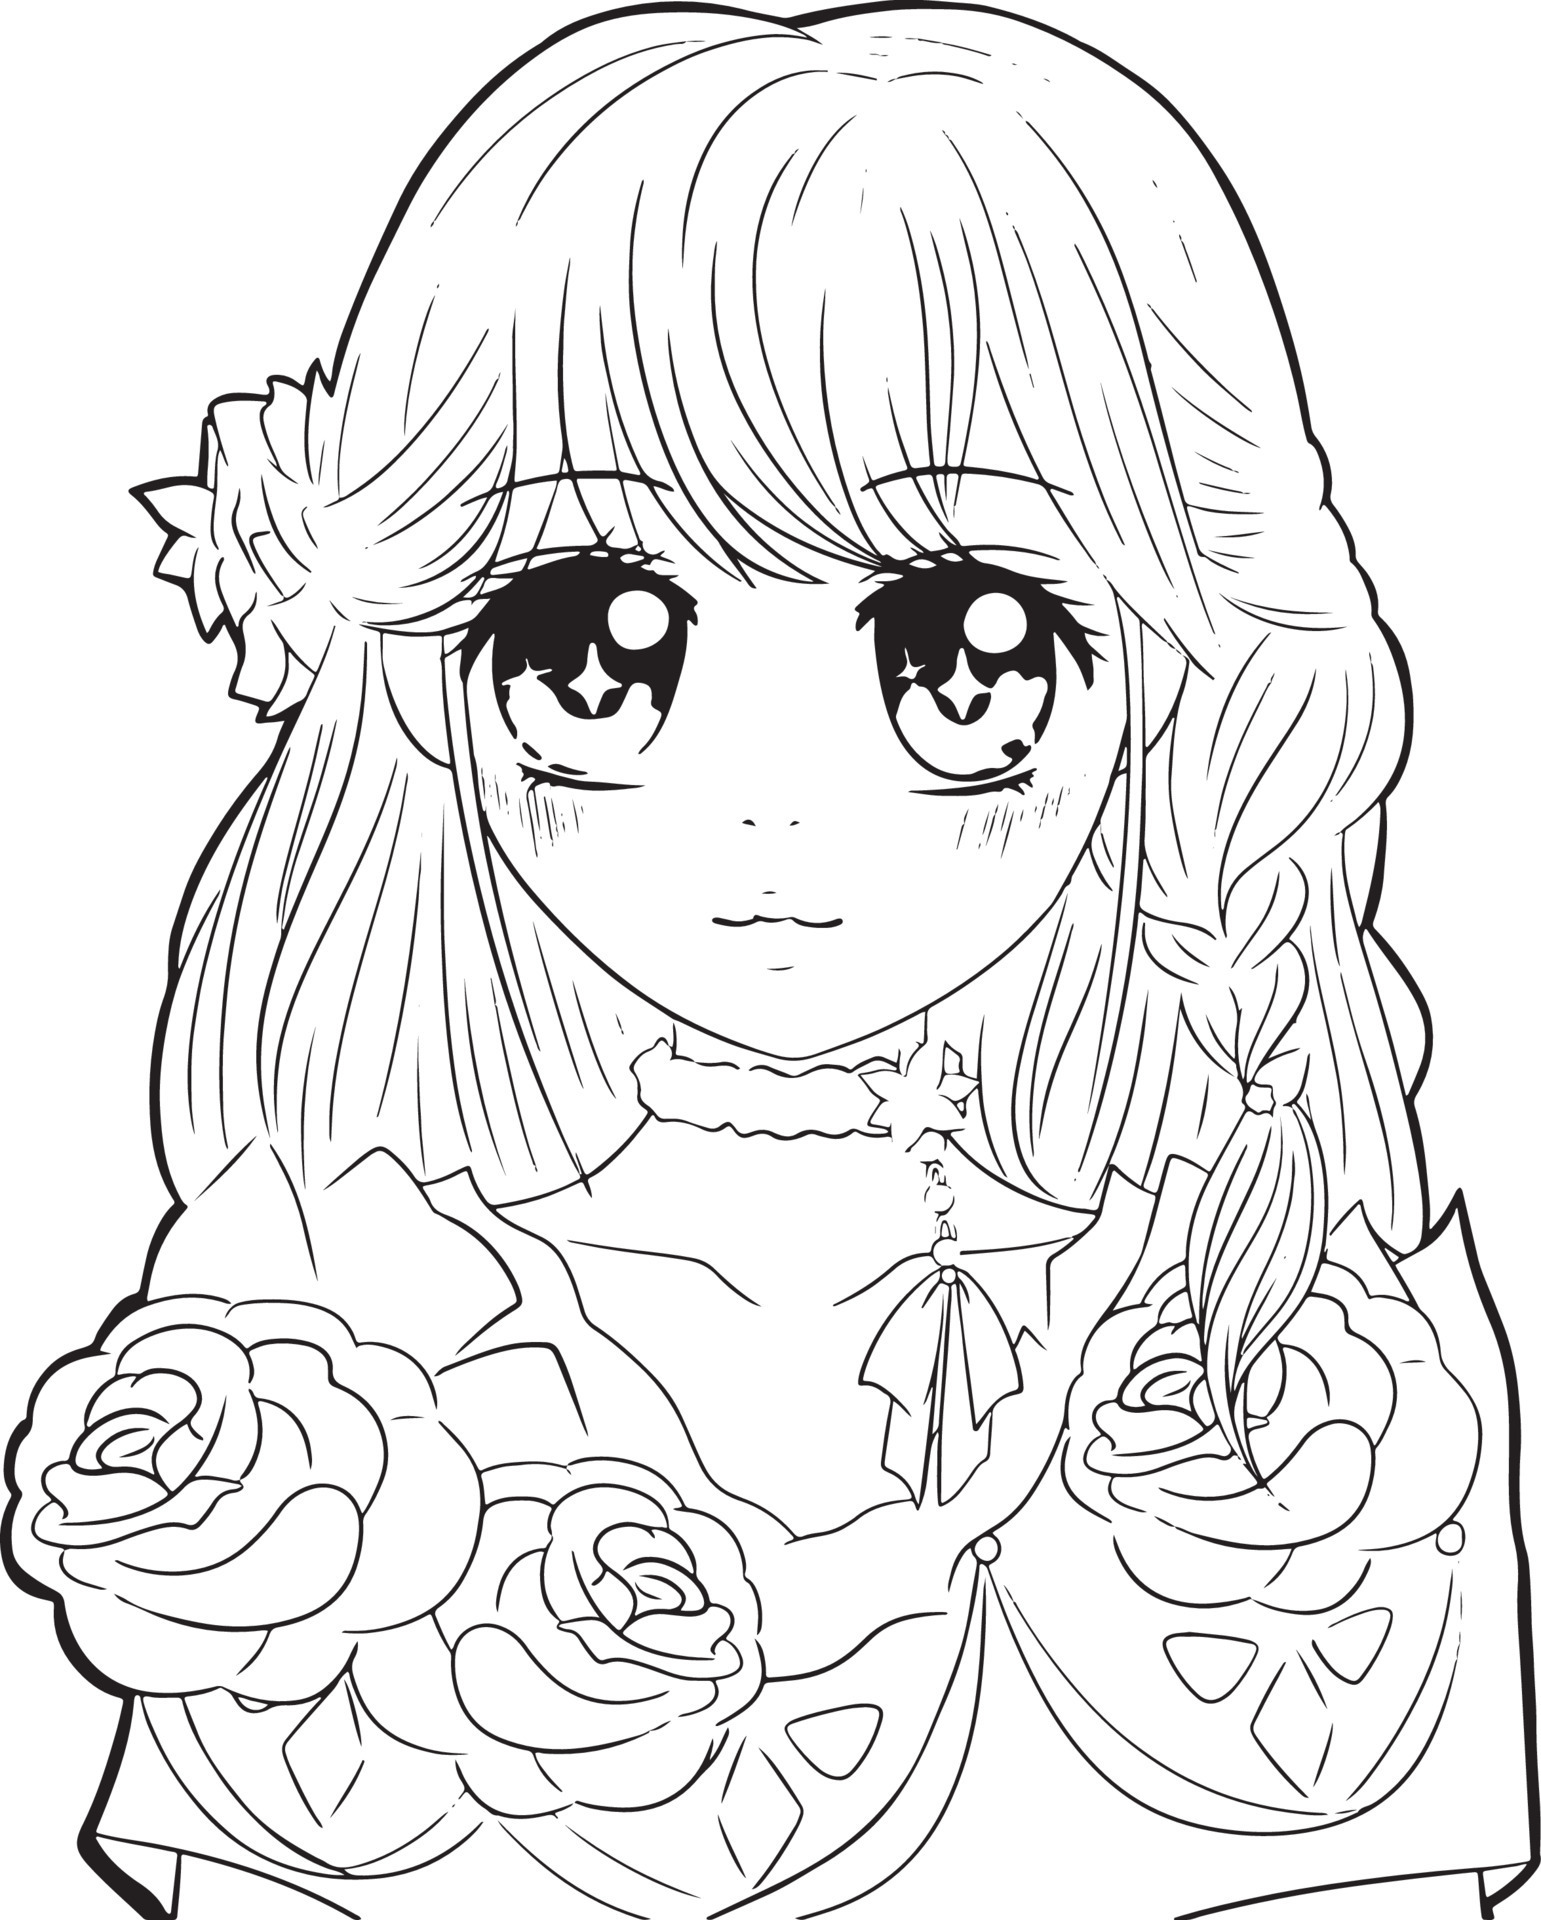 Discover 84+ kawaii anime coloring pages latest - in.coedo.com.vn